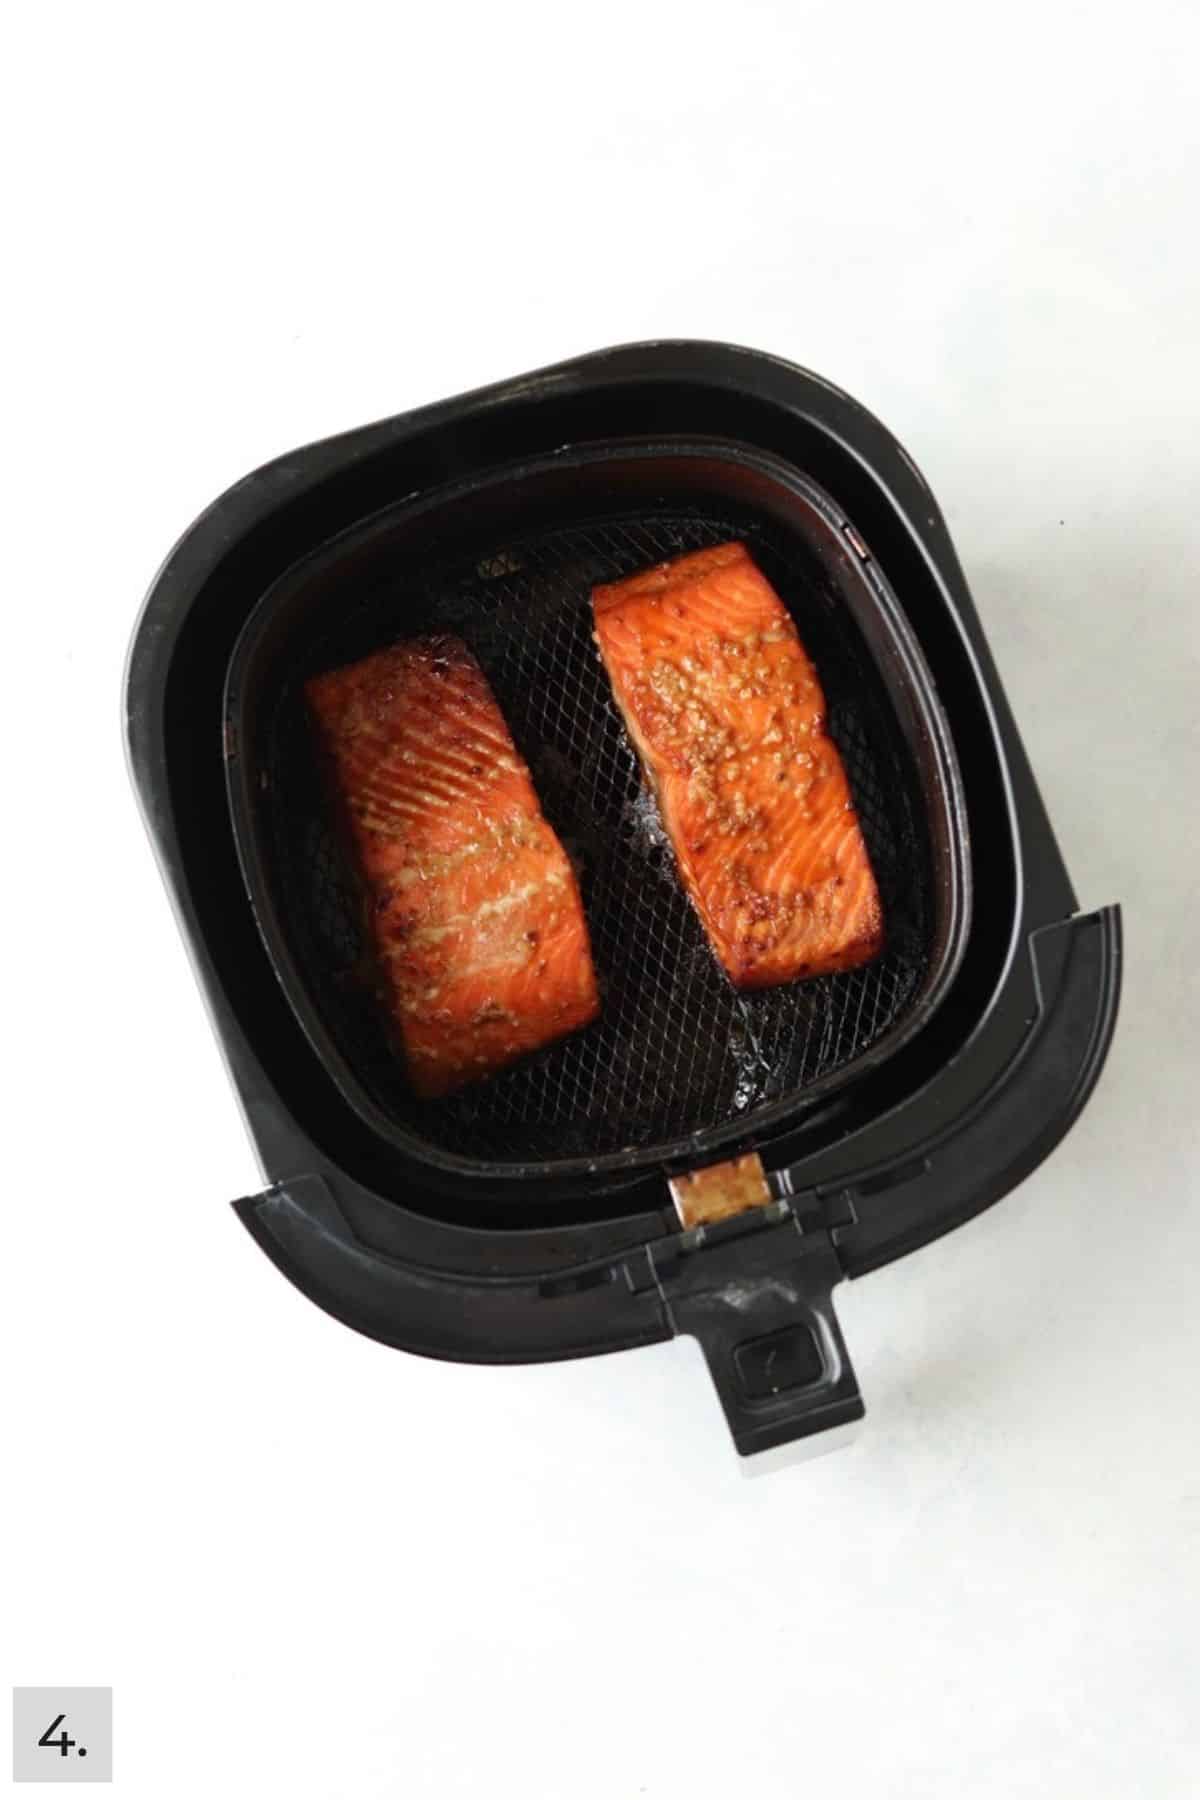 Two cooked honey garlic salmon filets in air fryer.